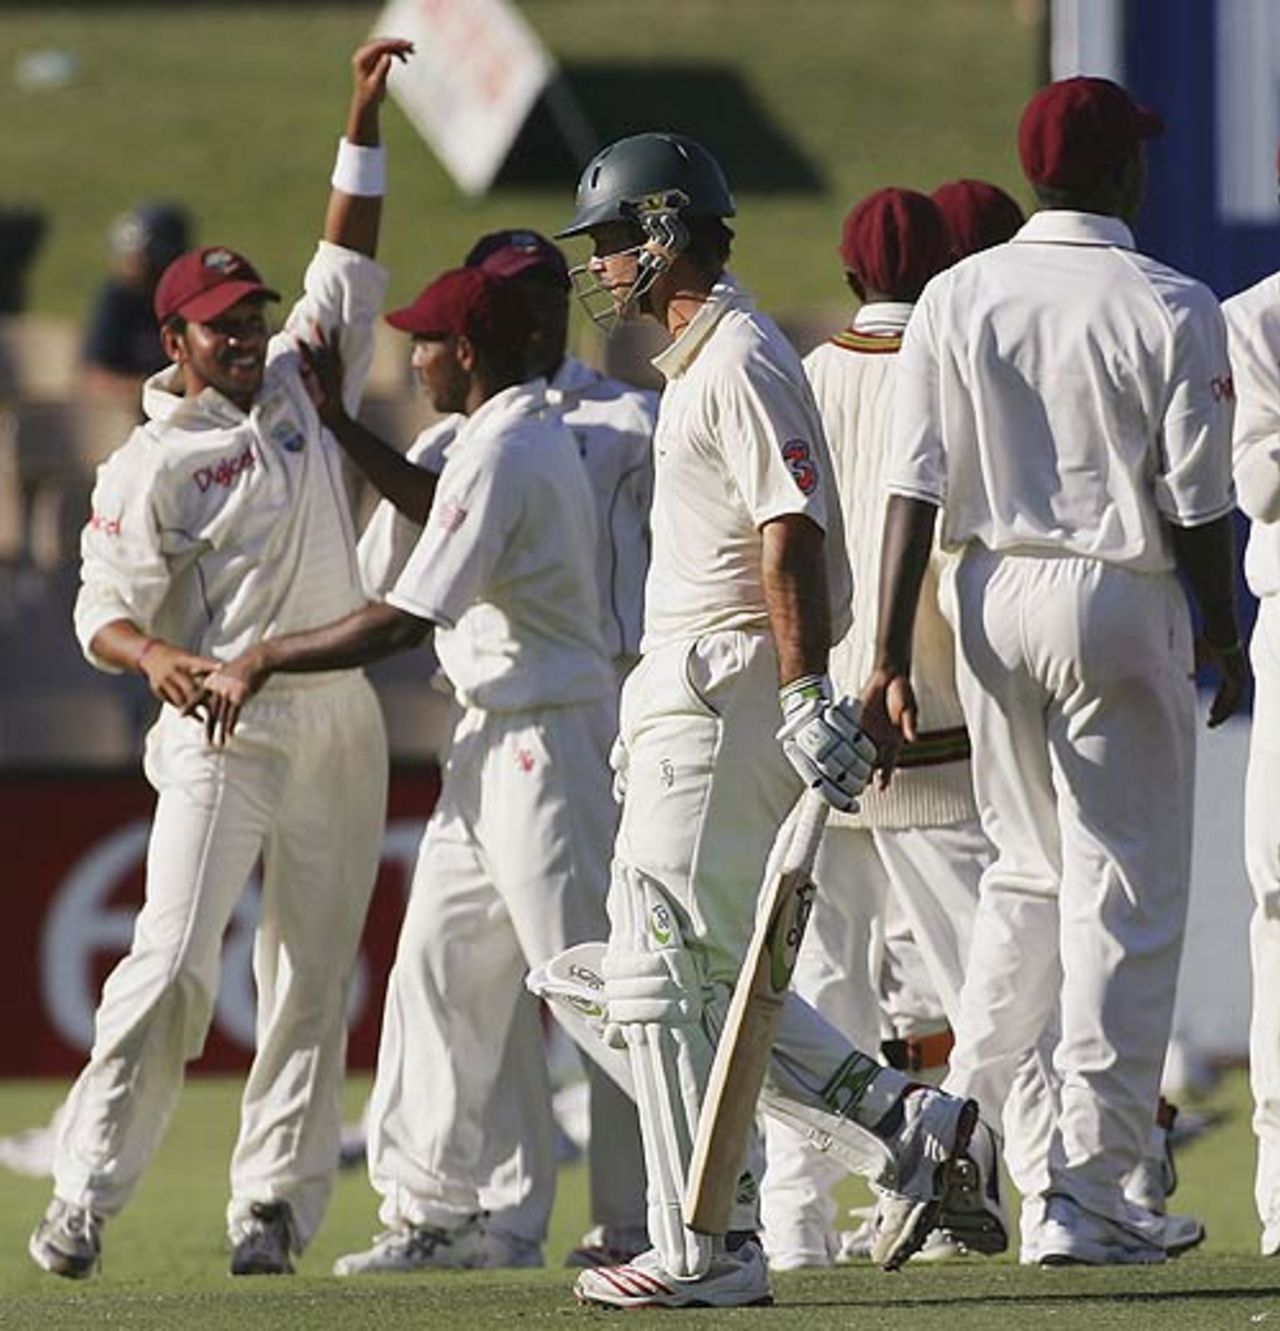 Ricky Ponting walks off after being caught by Ramnaresh Sarwan, Australia v West Indies, 3rd Test, Adelaide, 4th day, November 28, 2005